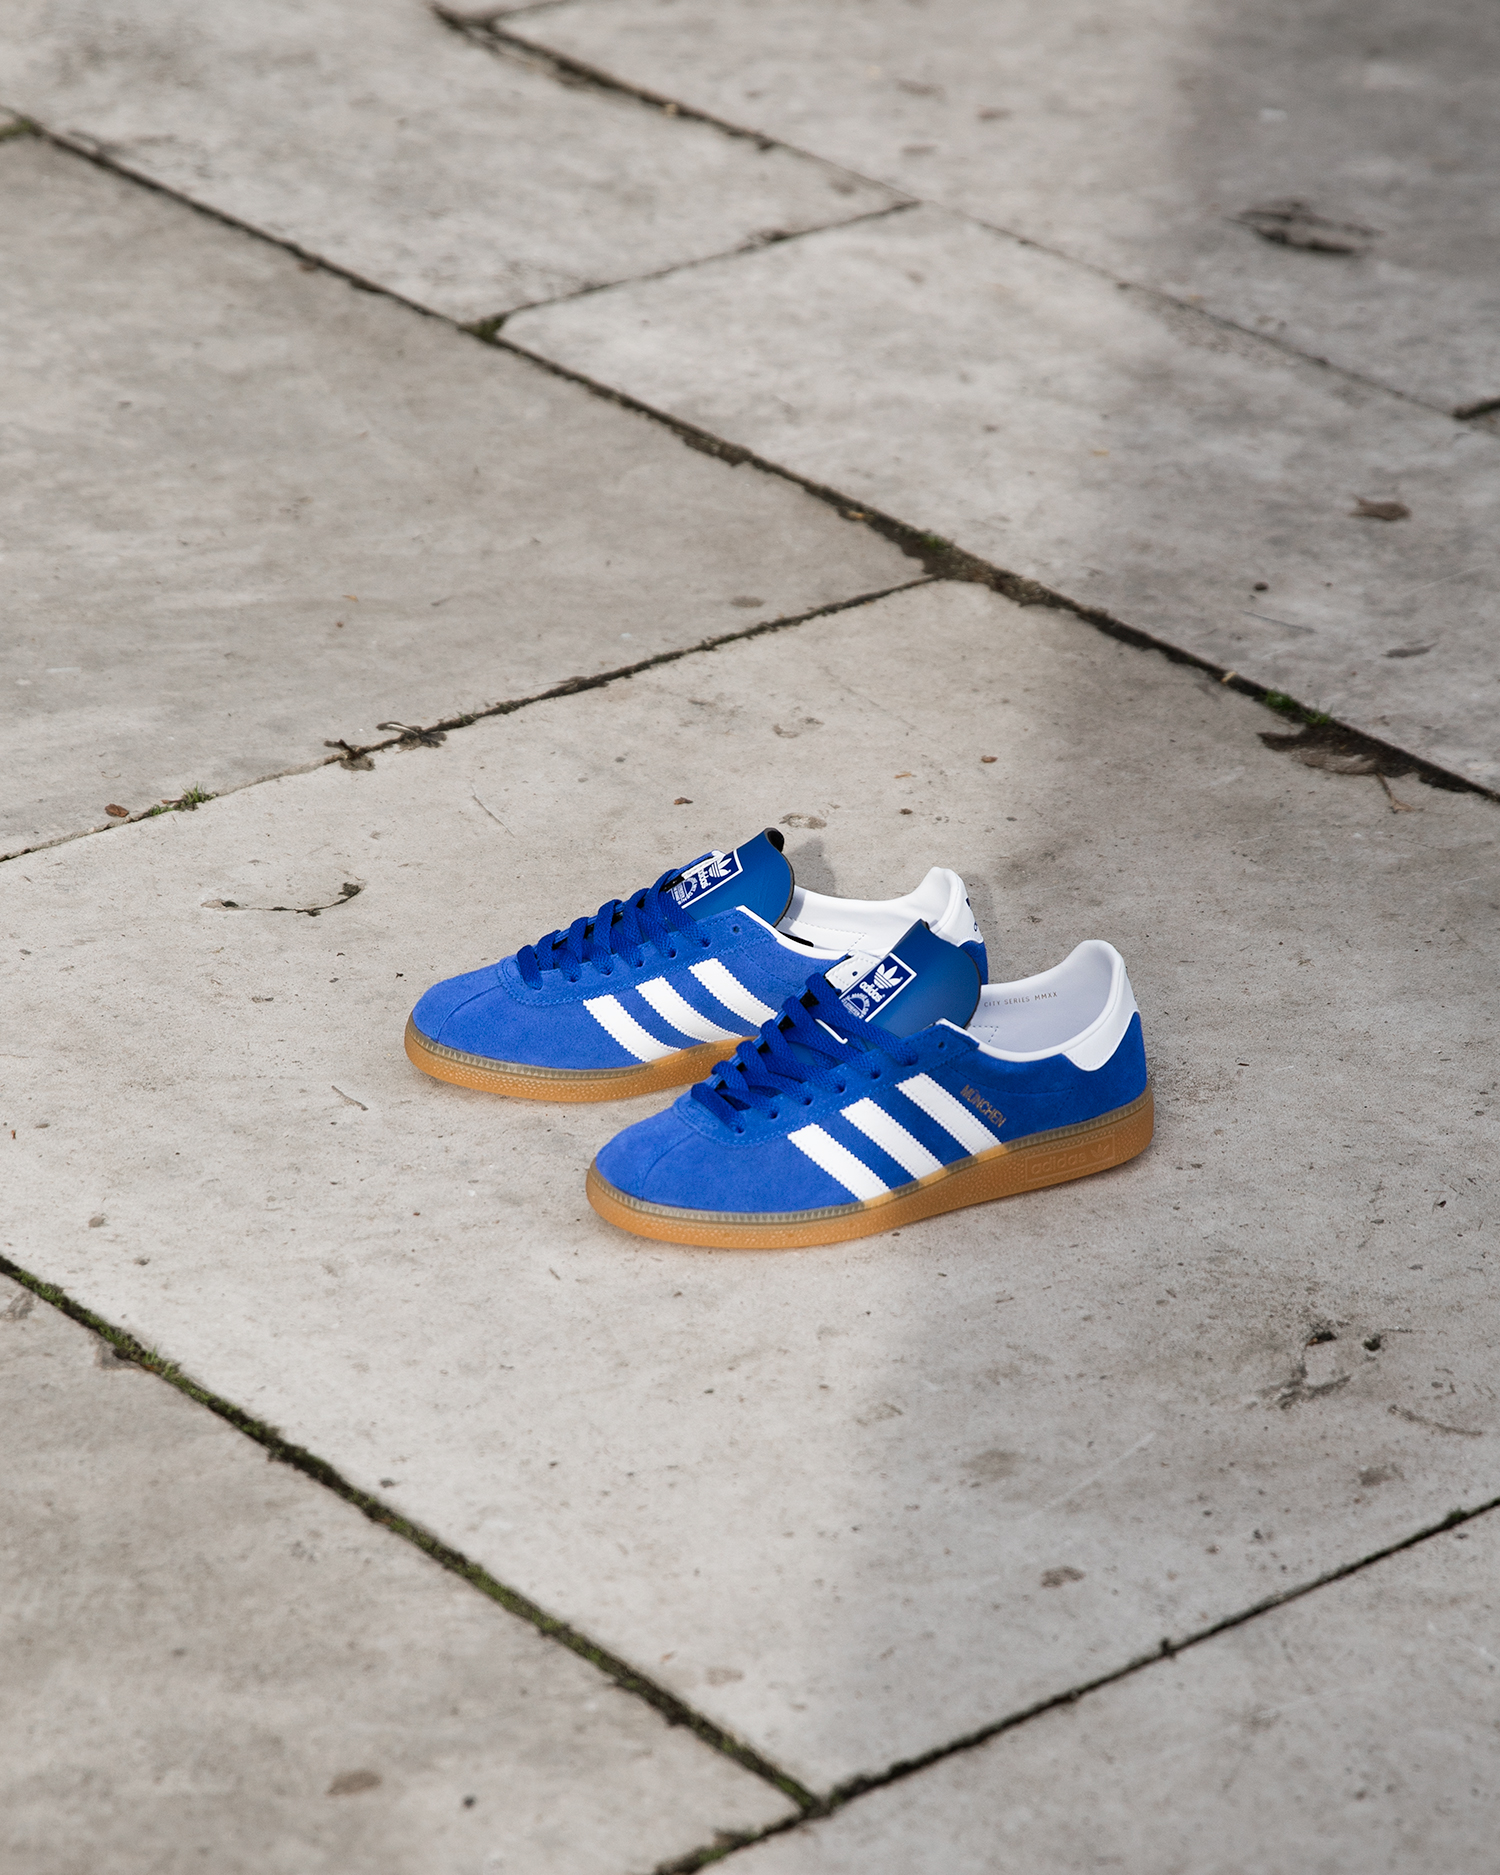 Footpatrol London on Twitter: "adidas München 'Royal Blue/Cloud White' in-store and online on Saturday 17th October (Available online 08:00AM BST), sizes range from UK6 - UK12, priced £85. #